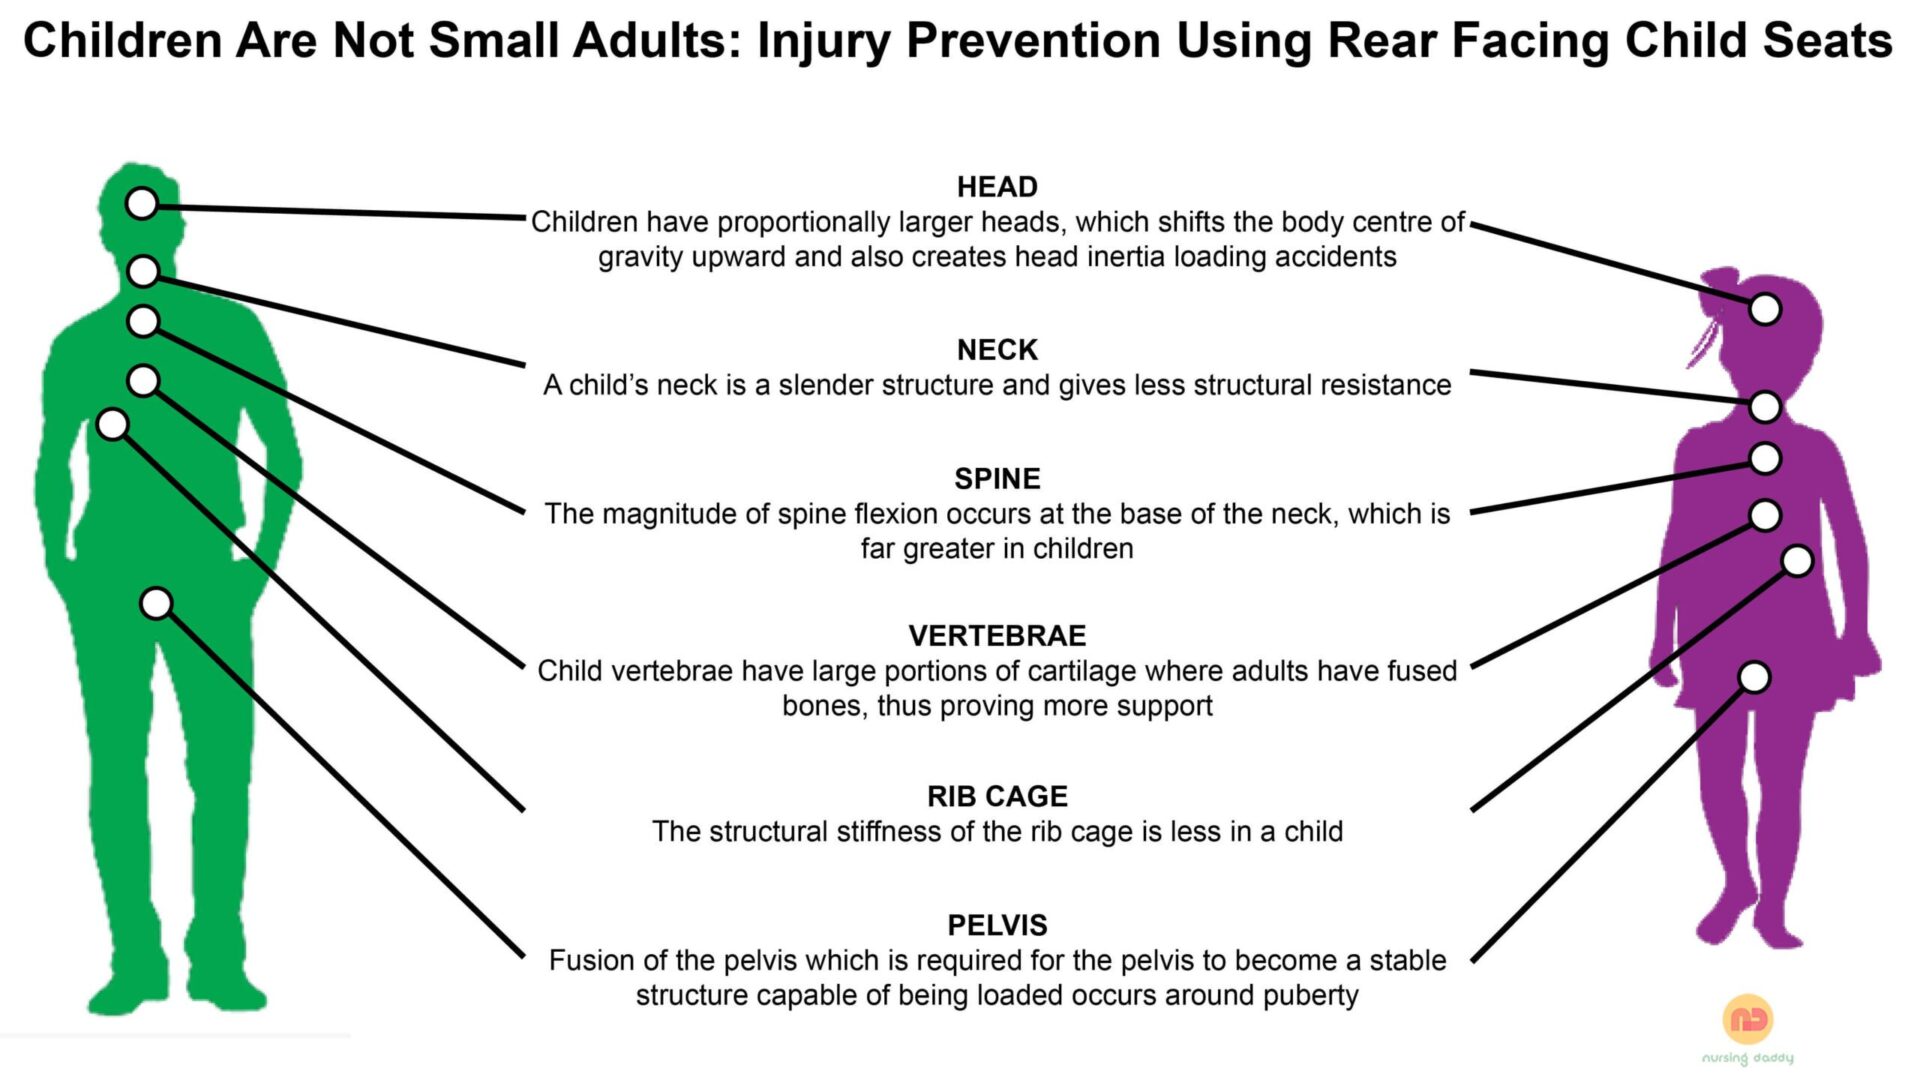 Children-Are-Not-Small-Adults_Injury-Prevention-using-Rear-Facing-Child-Seats (1)